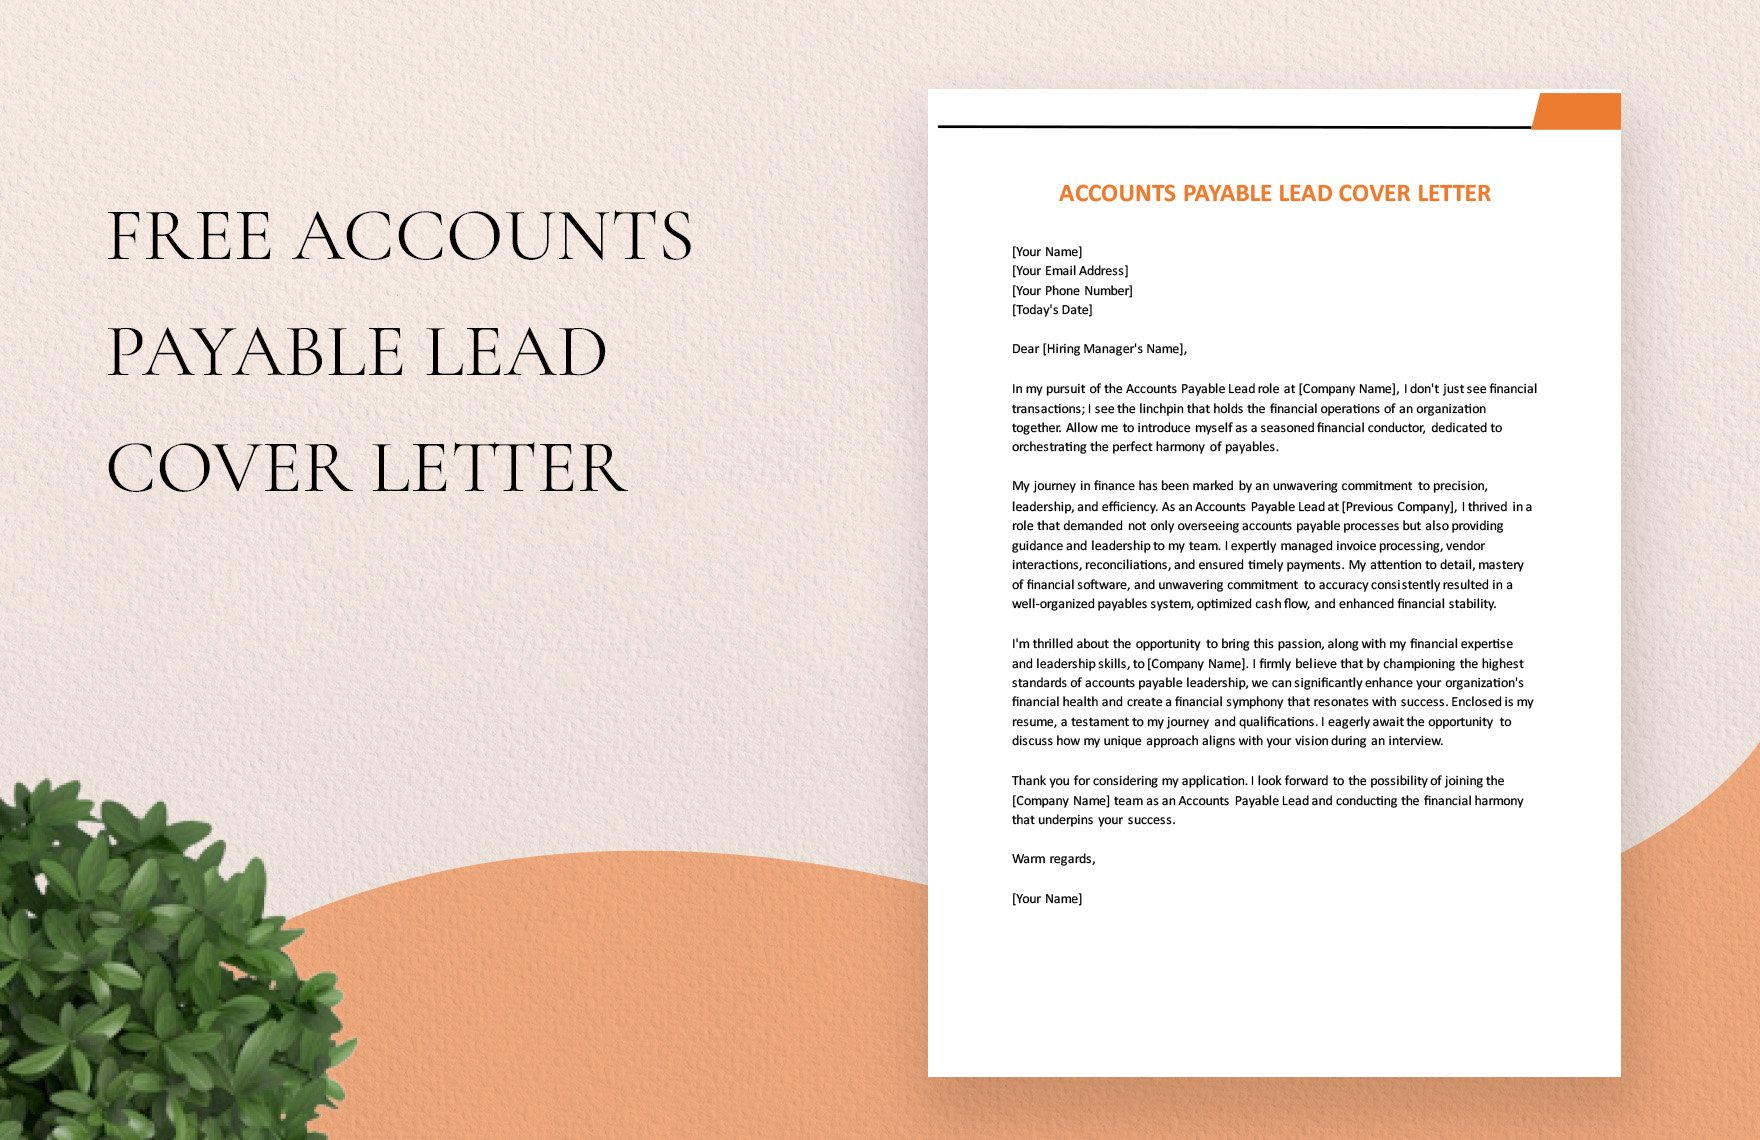 Accounts Payable Lead Cover Letter in Word, Google Docs, PDF